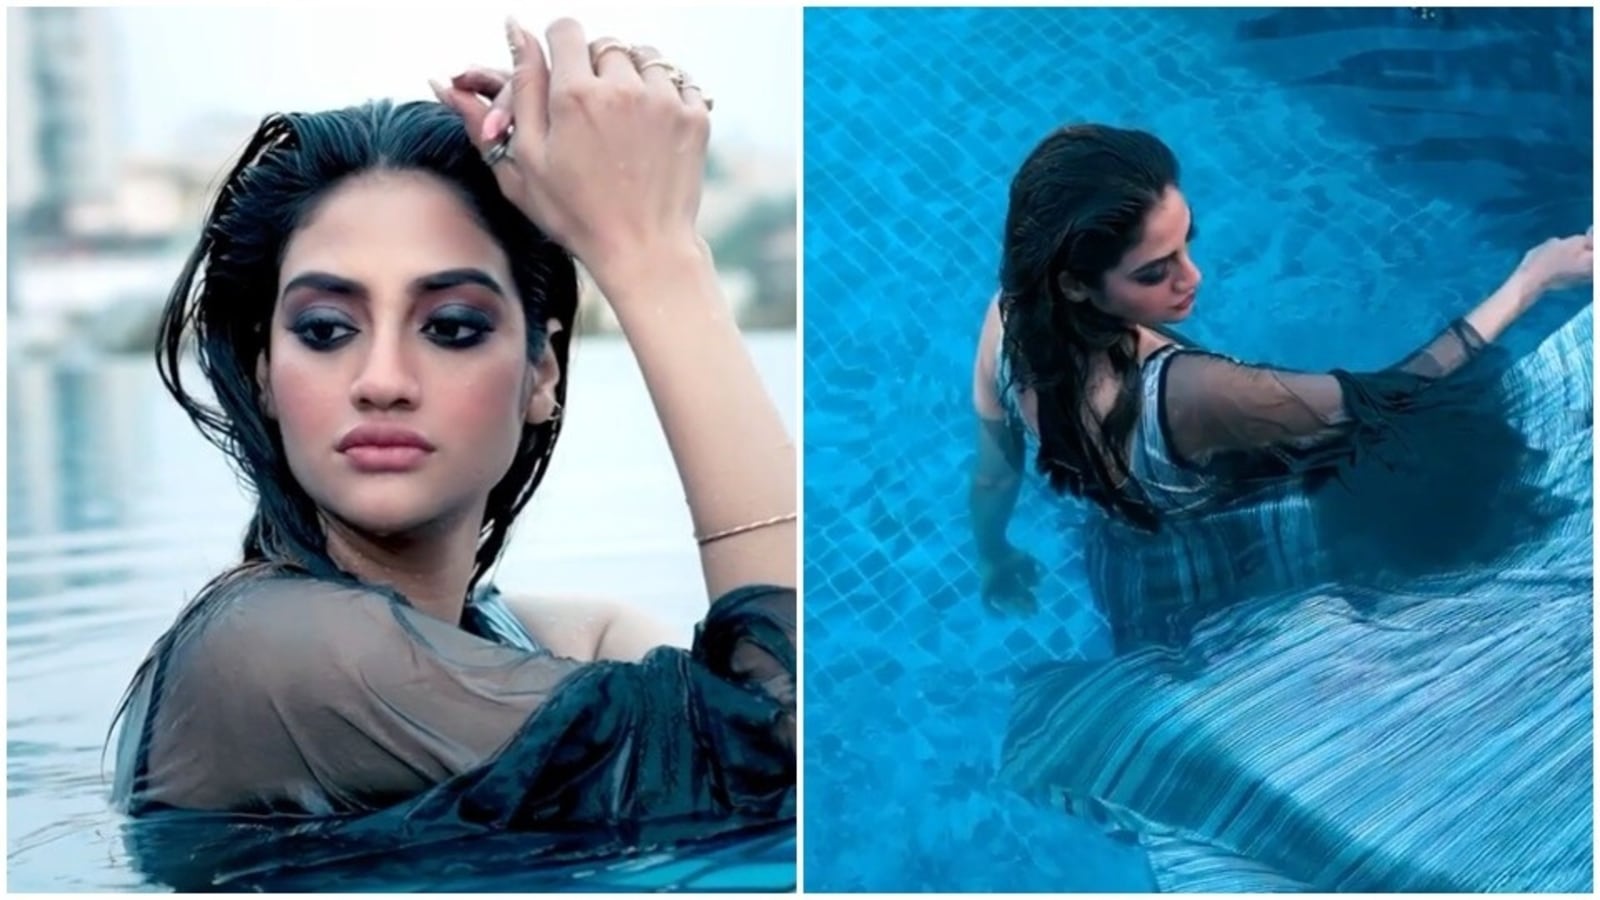 Nusrat X X X Photo - Pregnant Nusrat Jahan takes a dip in pool for photoshoot, promotes  contraceptive pills on Instagram - Hindustan Times